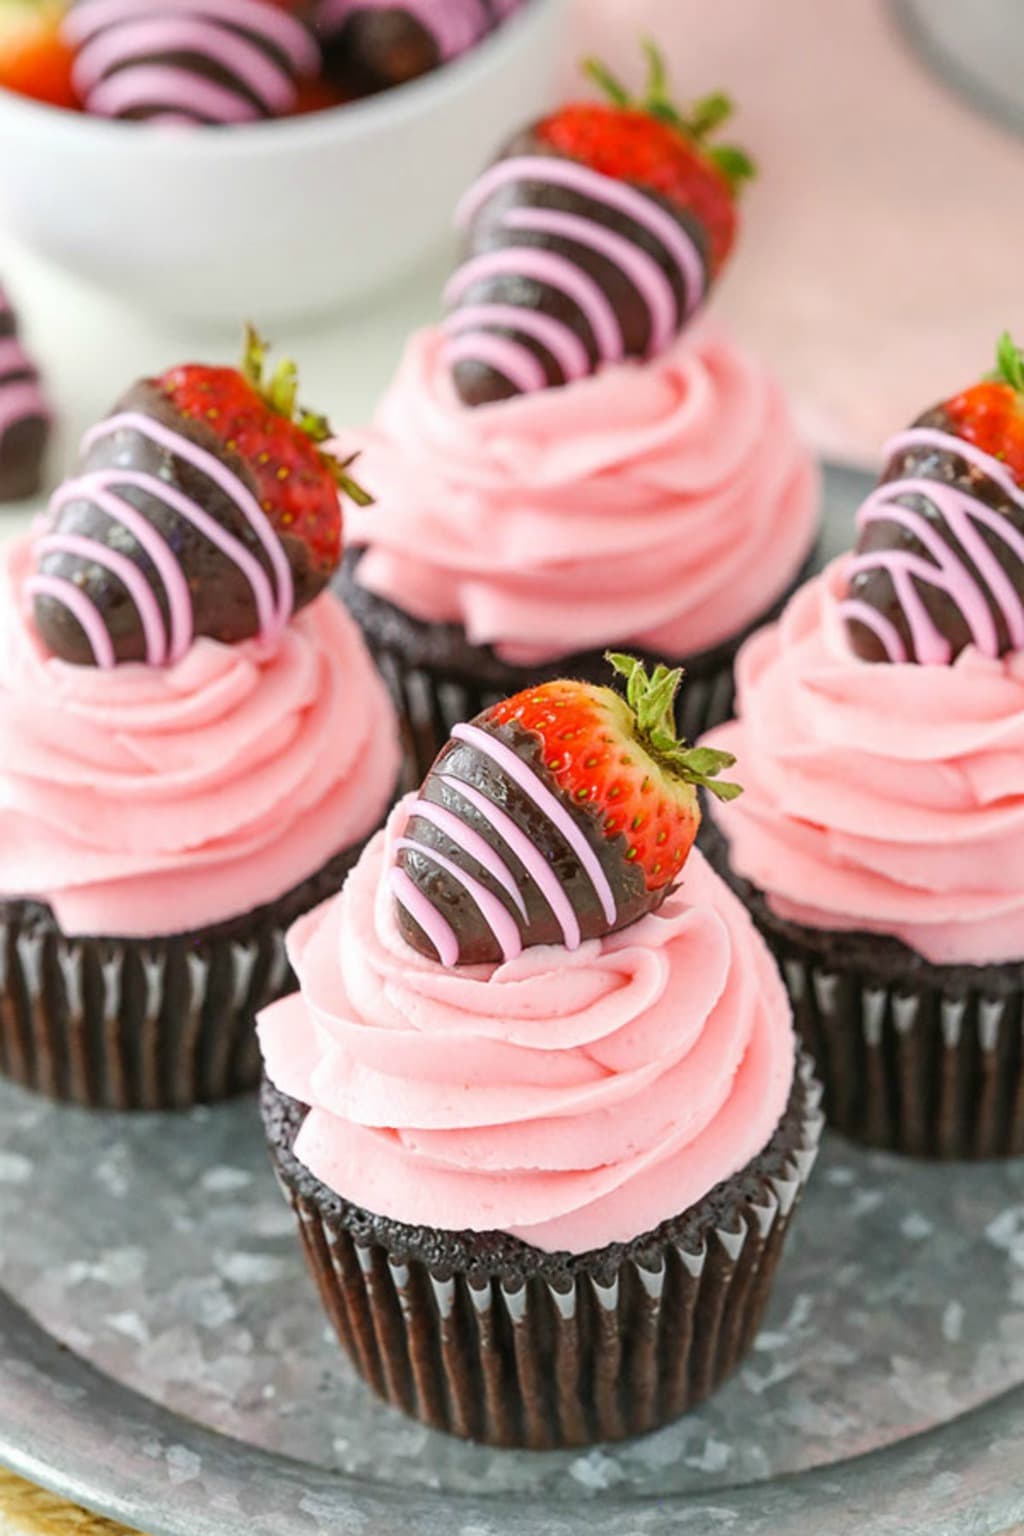 Close up picture of Chocolate Covered Strawberry Cupcakes from the Life, Love and Sugar website.